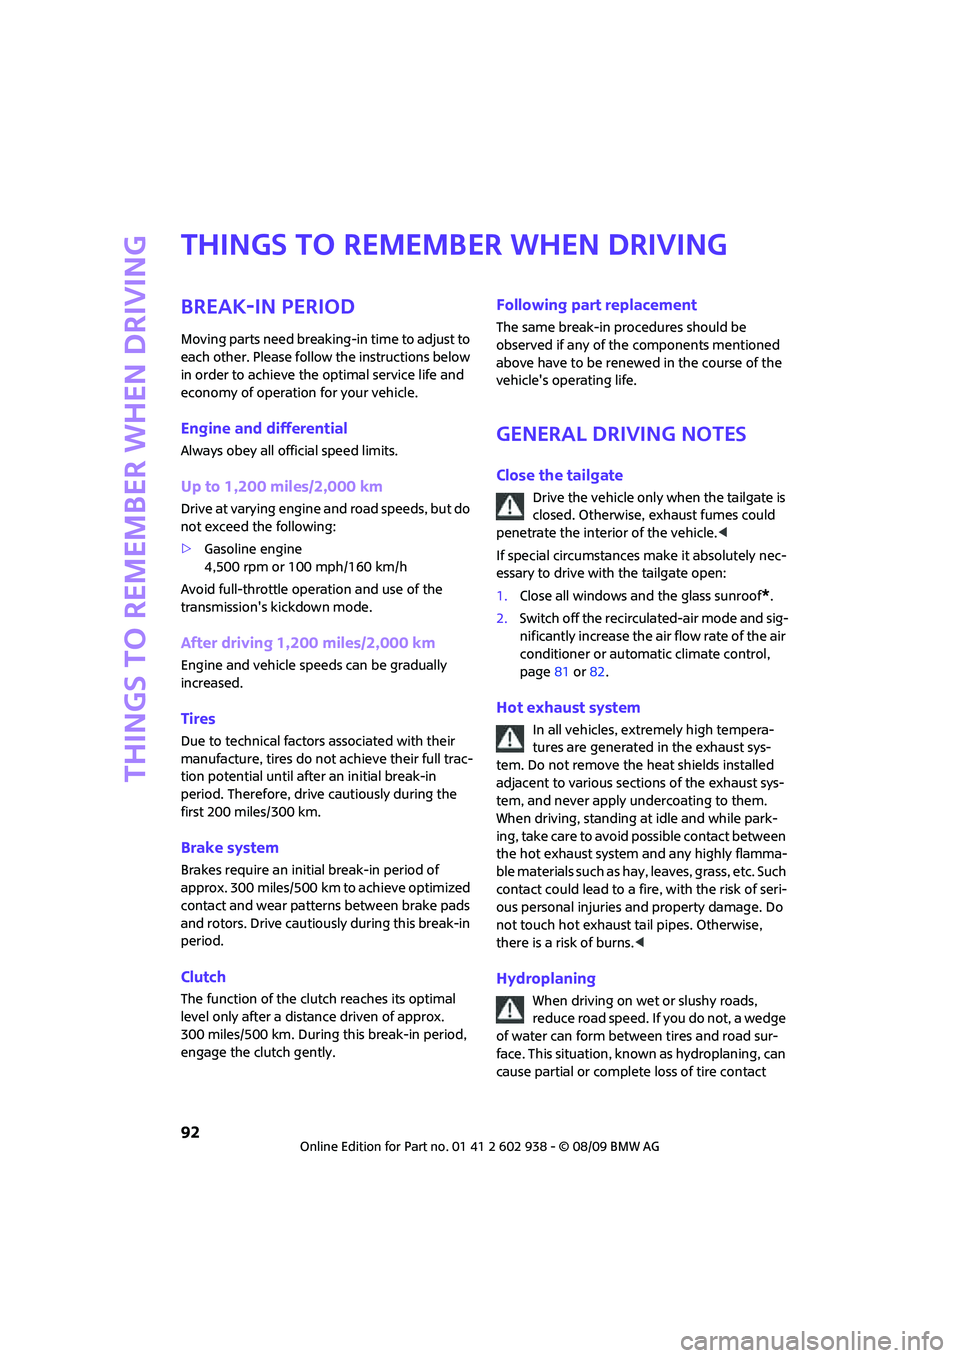 MINI COOPER 2010  Owners Manual Things to remember when driving
92
Things to remember when driving
Break-in period
Moving parts need breaking-in time to adjust to 
each other. Please follow the instructions below 
in order to achiev